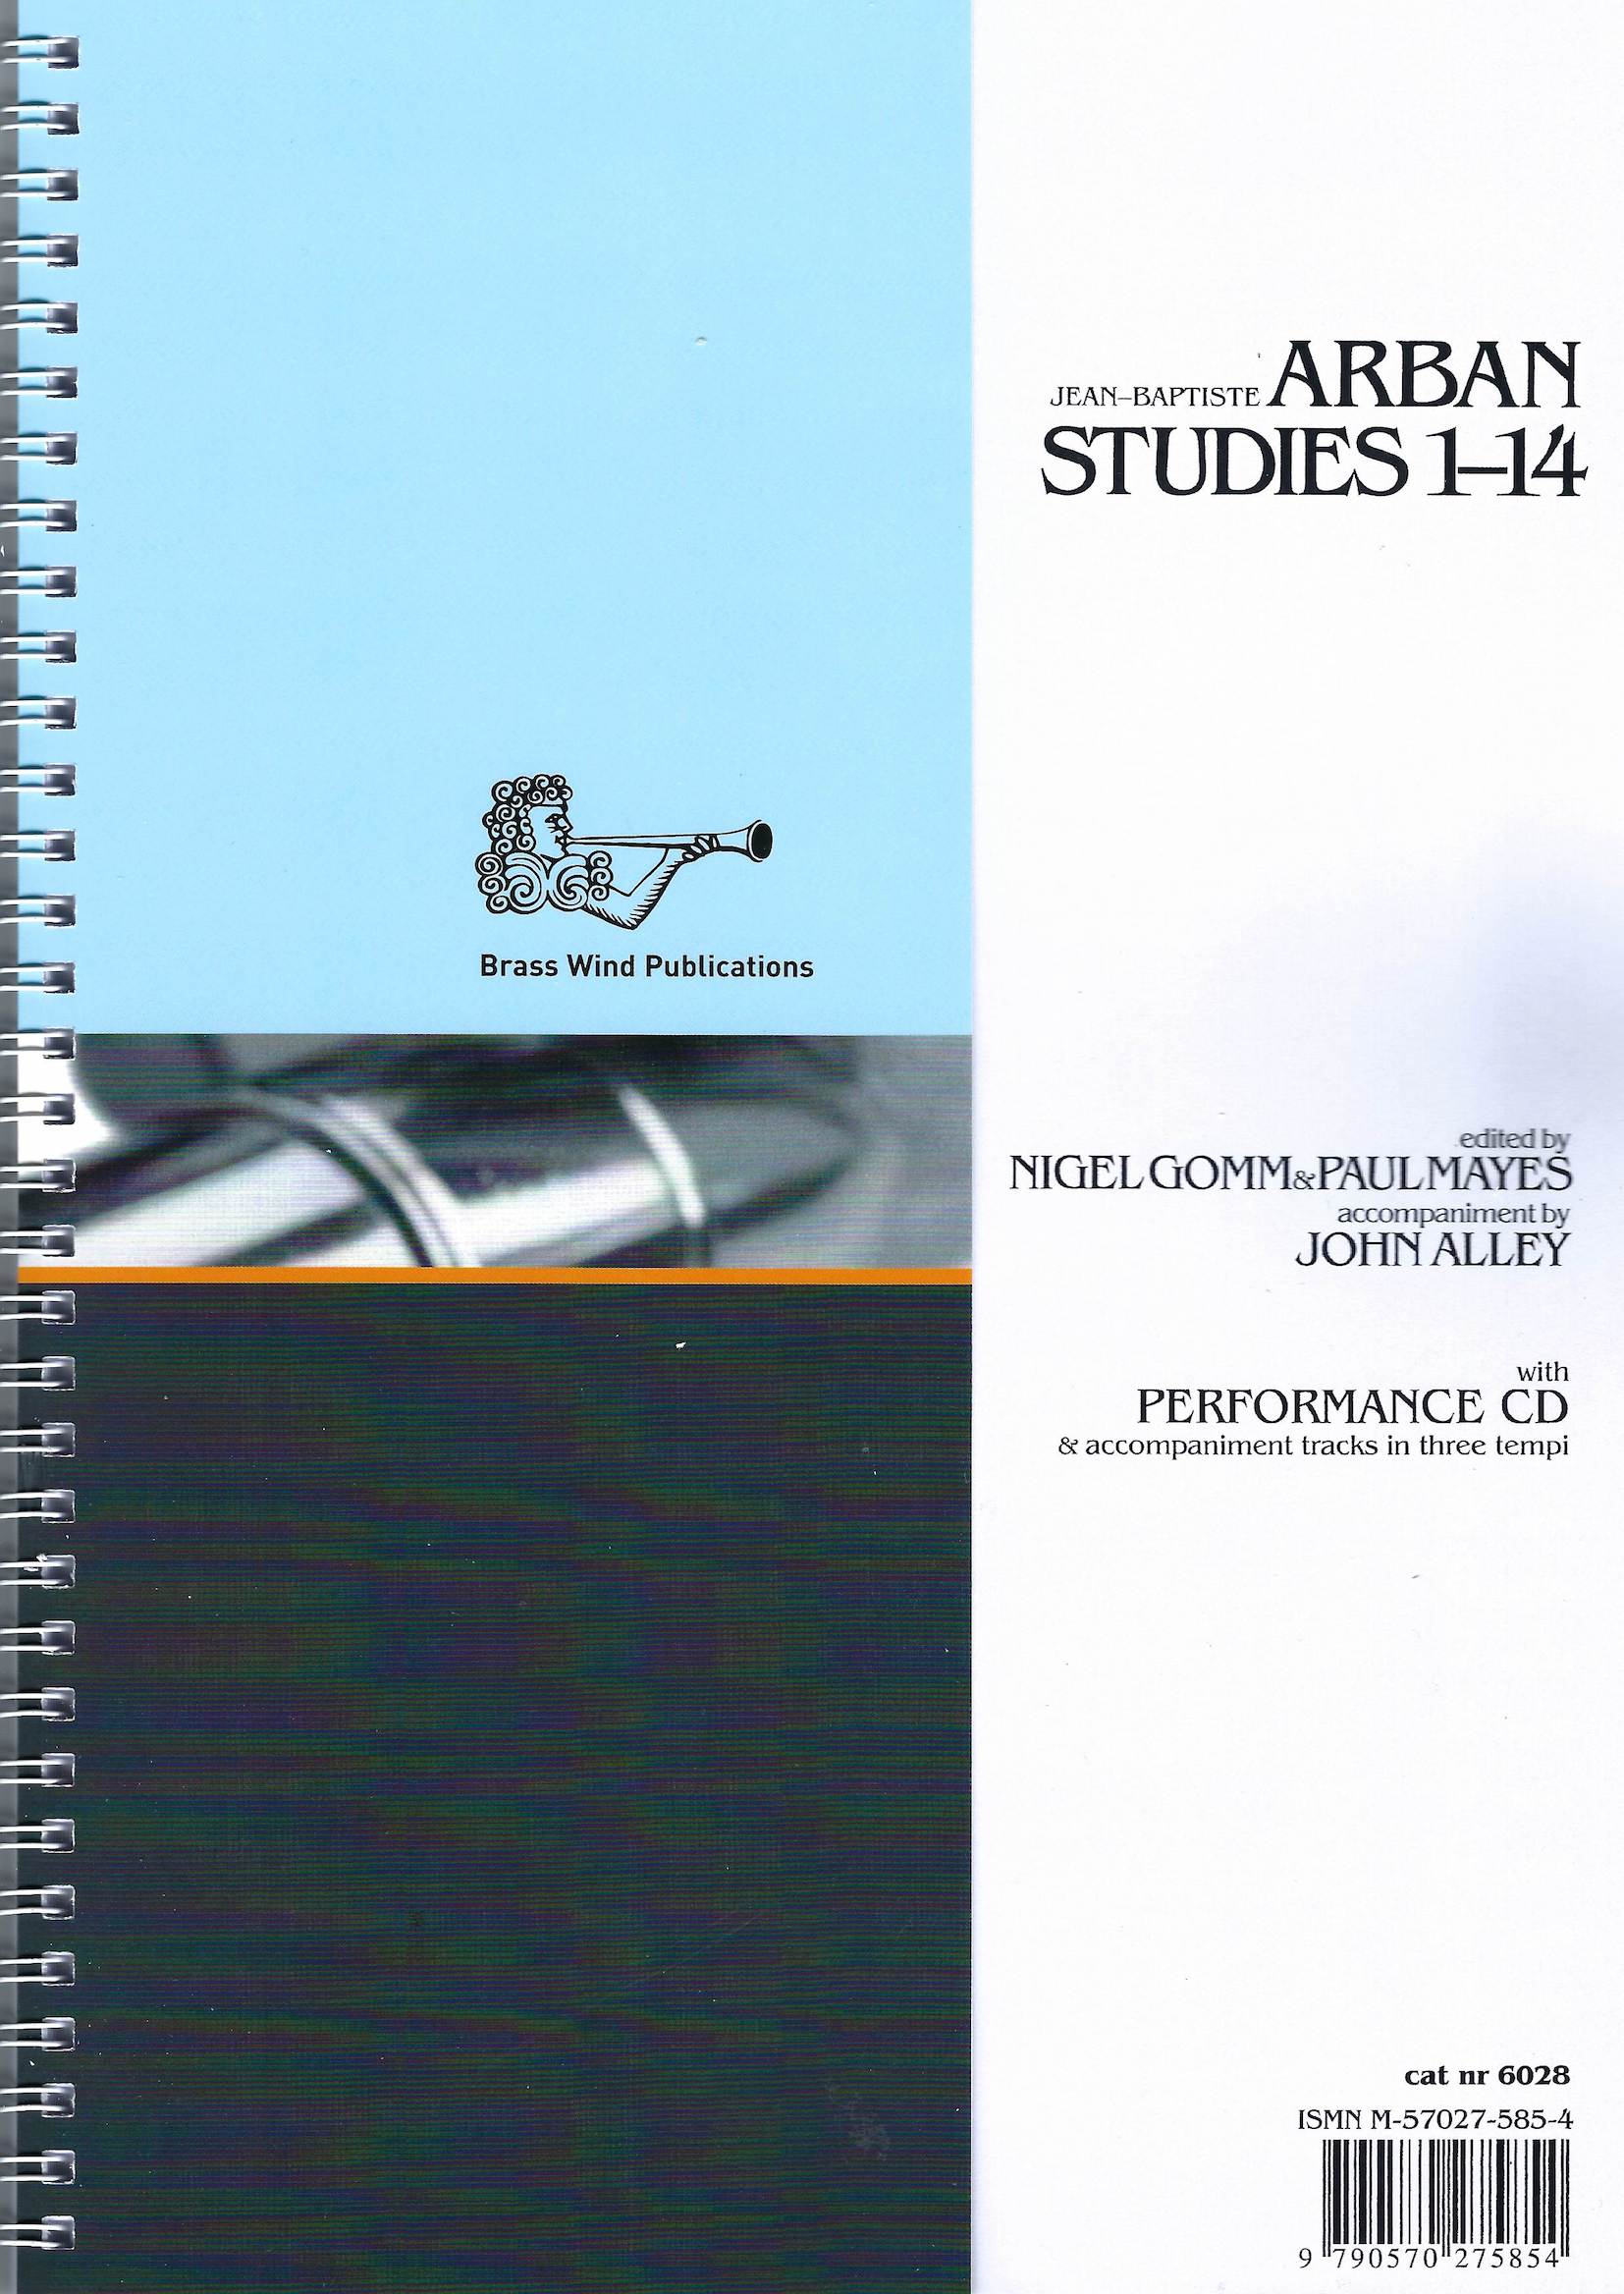 Arban Studies 1-14 - Ed. Gomm and Mayes (solo part, piano part and 2CDs) Treble Clef version